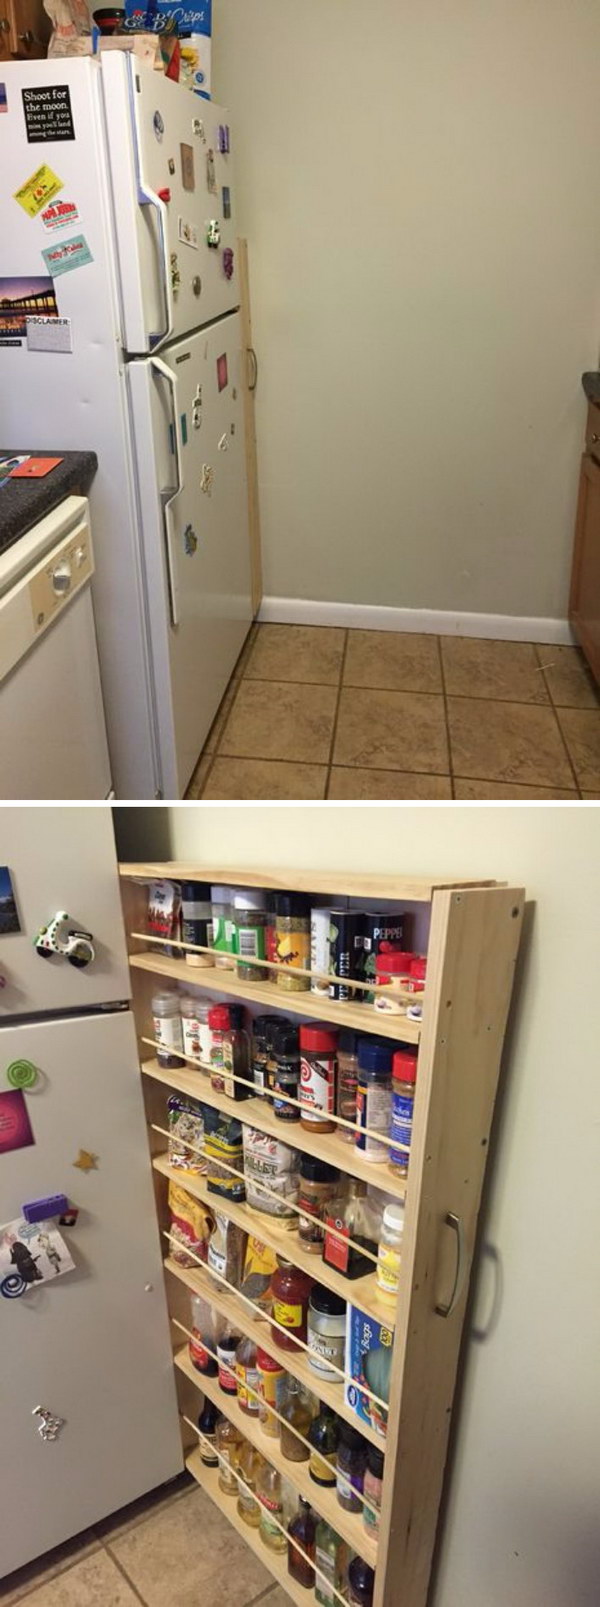 28 Creative Hidden Storage Ideas For Small Spaces